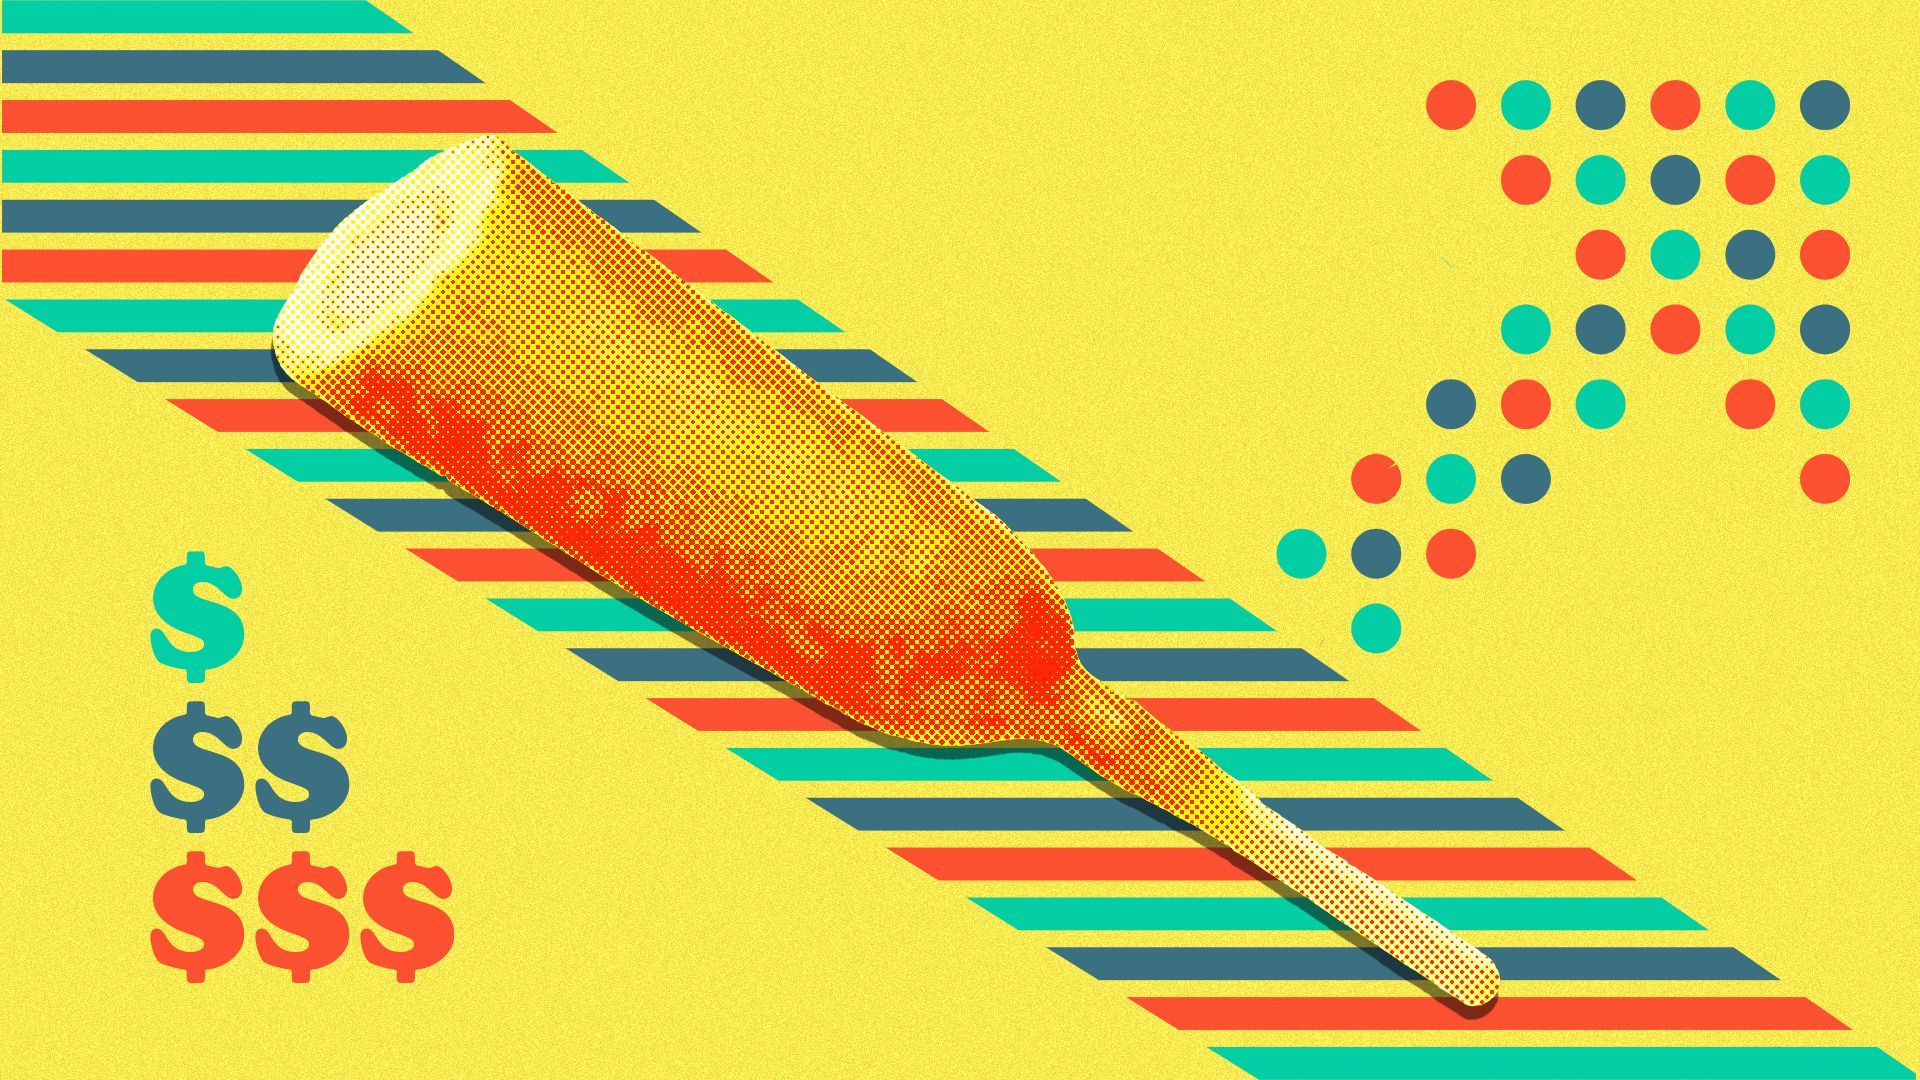 Illustration of a corn dog over a pattern of stripes, with dollar signs and an upward facing arrow.